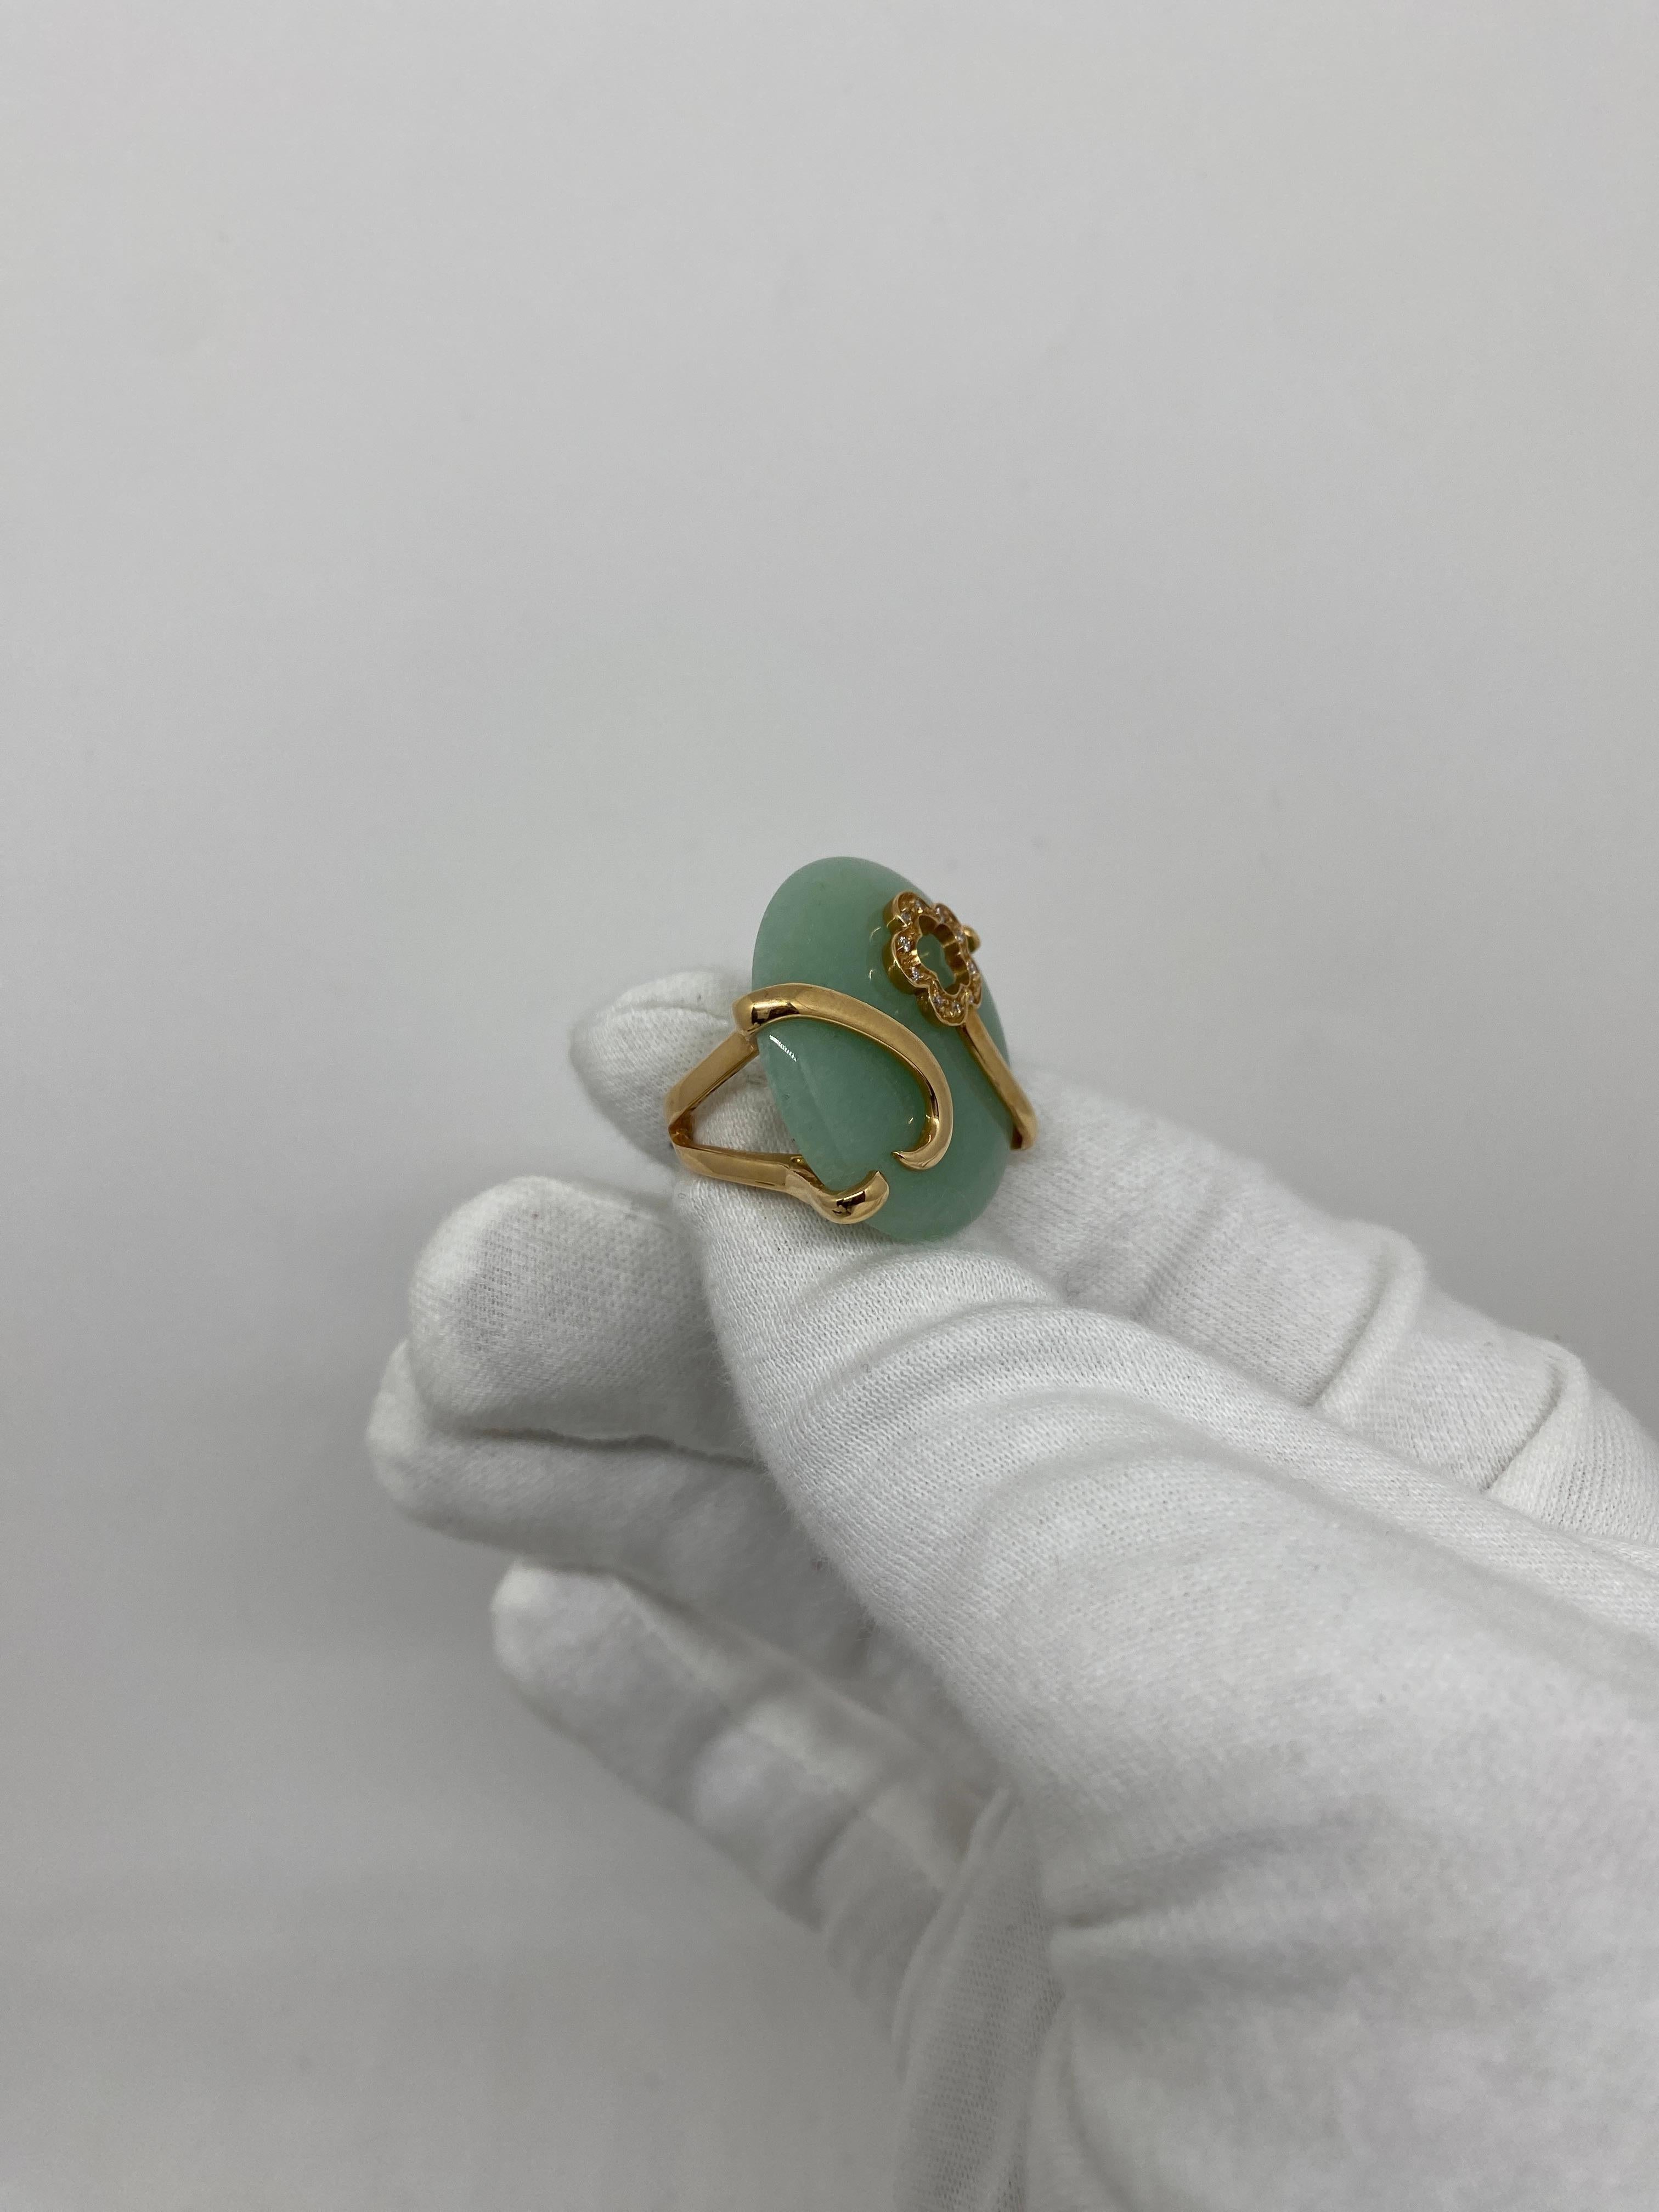 Ring made of 18 kt rose gold with natural aventurine and natural white brilliant-cut diamonds for ct.0.07

Welcome to our jewelry collection, where every piece tells a story of timeless elegance and unparalleled craftsmanship. As a family-run